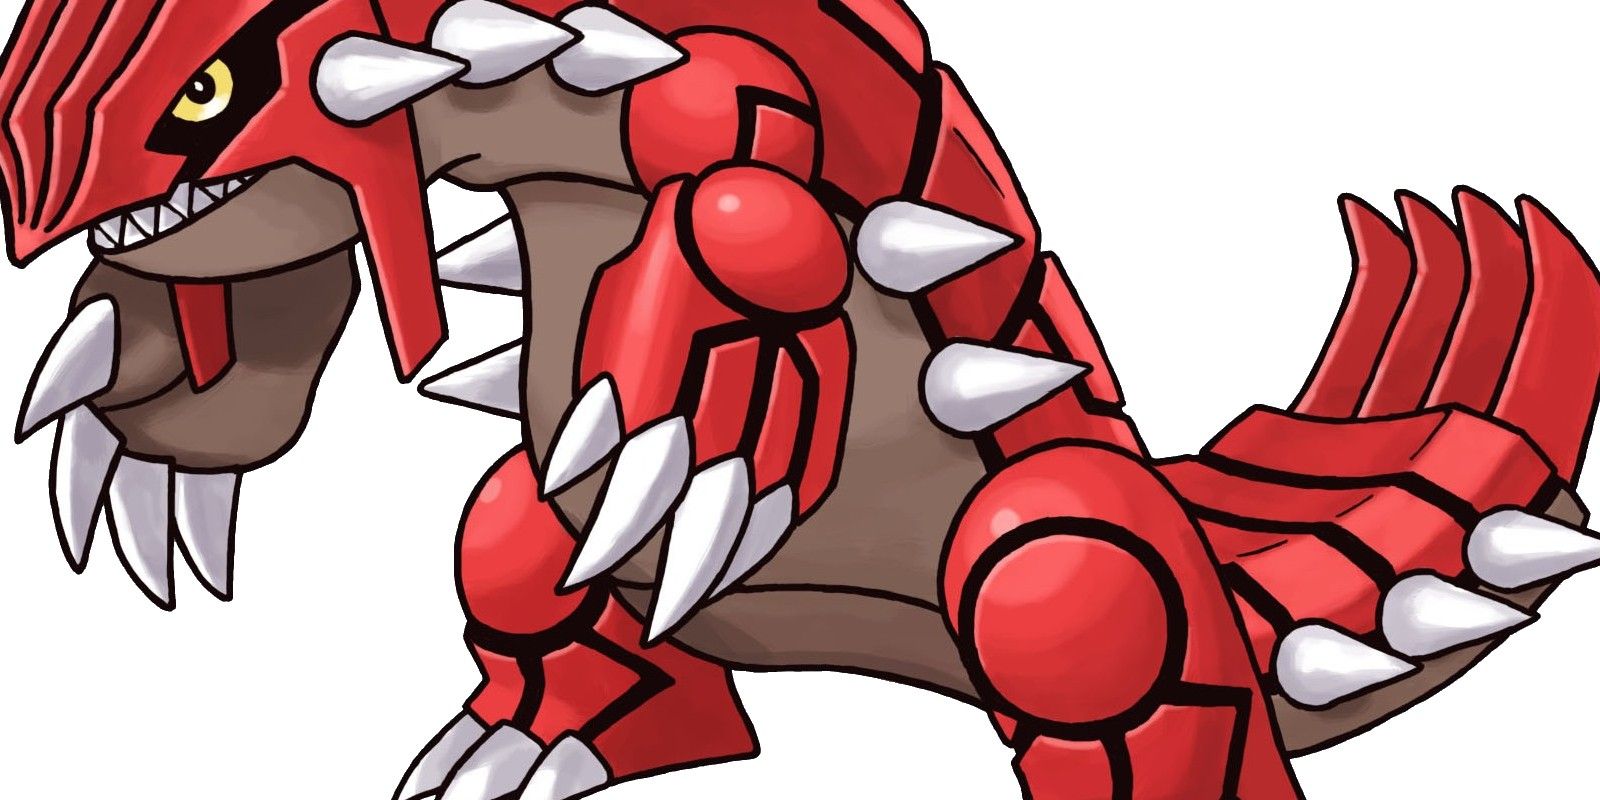 Groudon in Pokemon Ruby and Sapphire